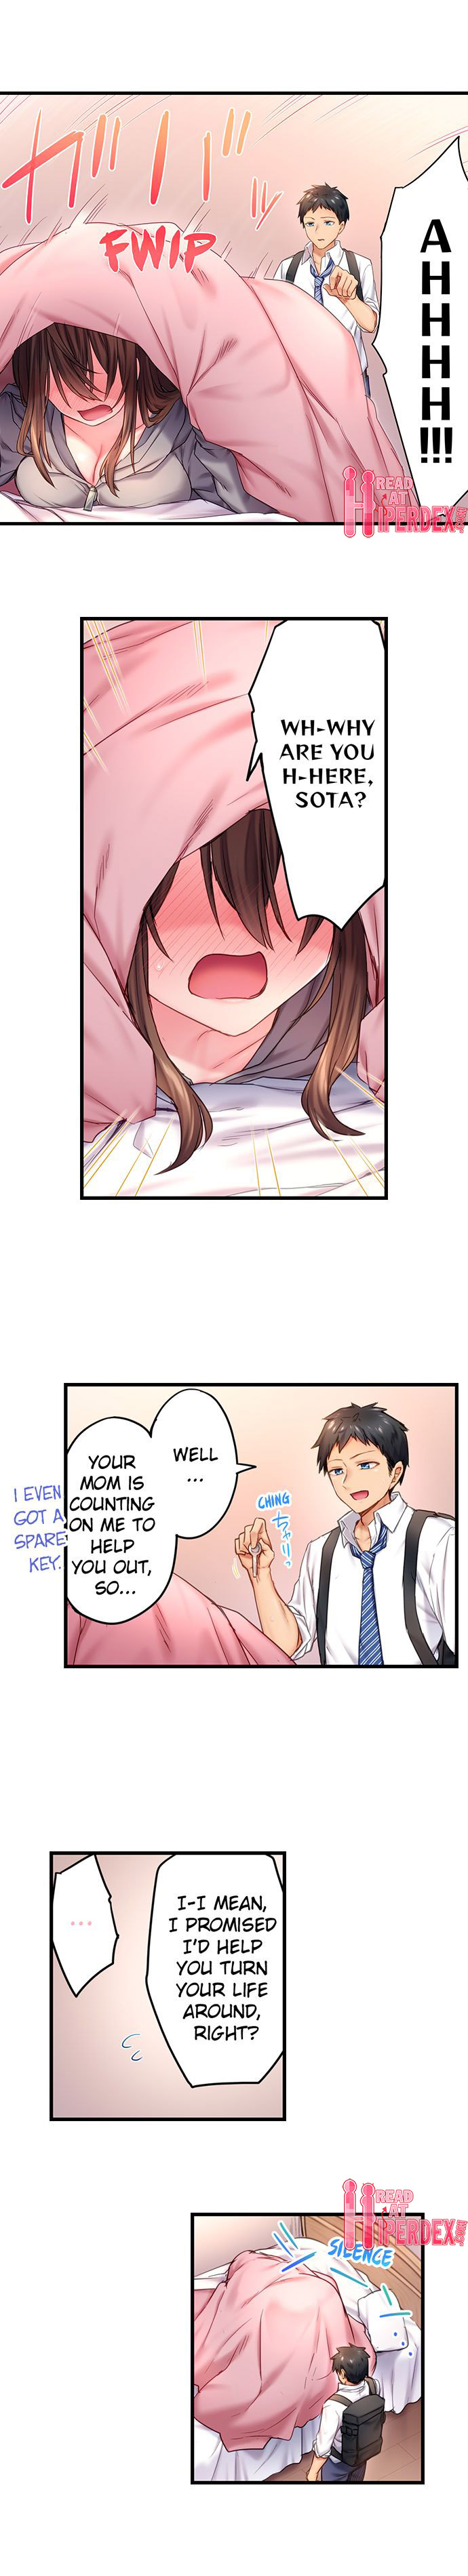 Can’t Believe My Loner Childhood Friend Became This Sexy Girl - Chapter 4 Page 6